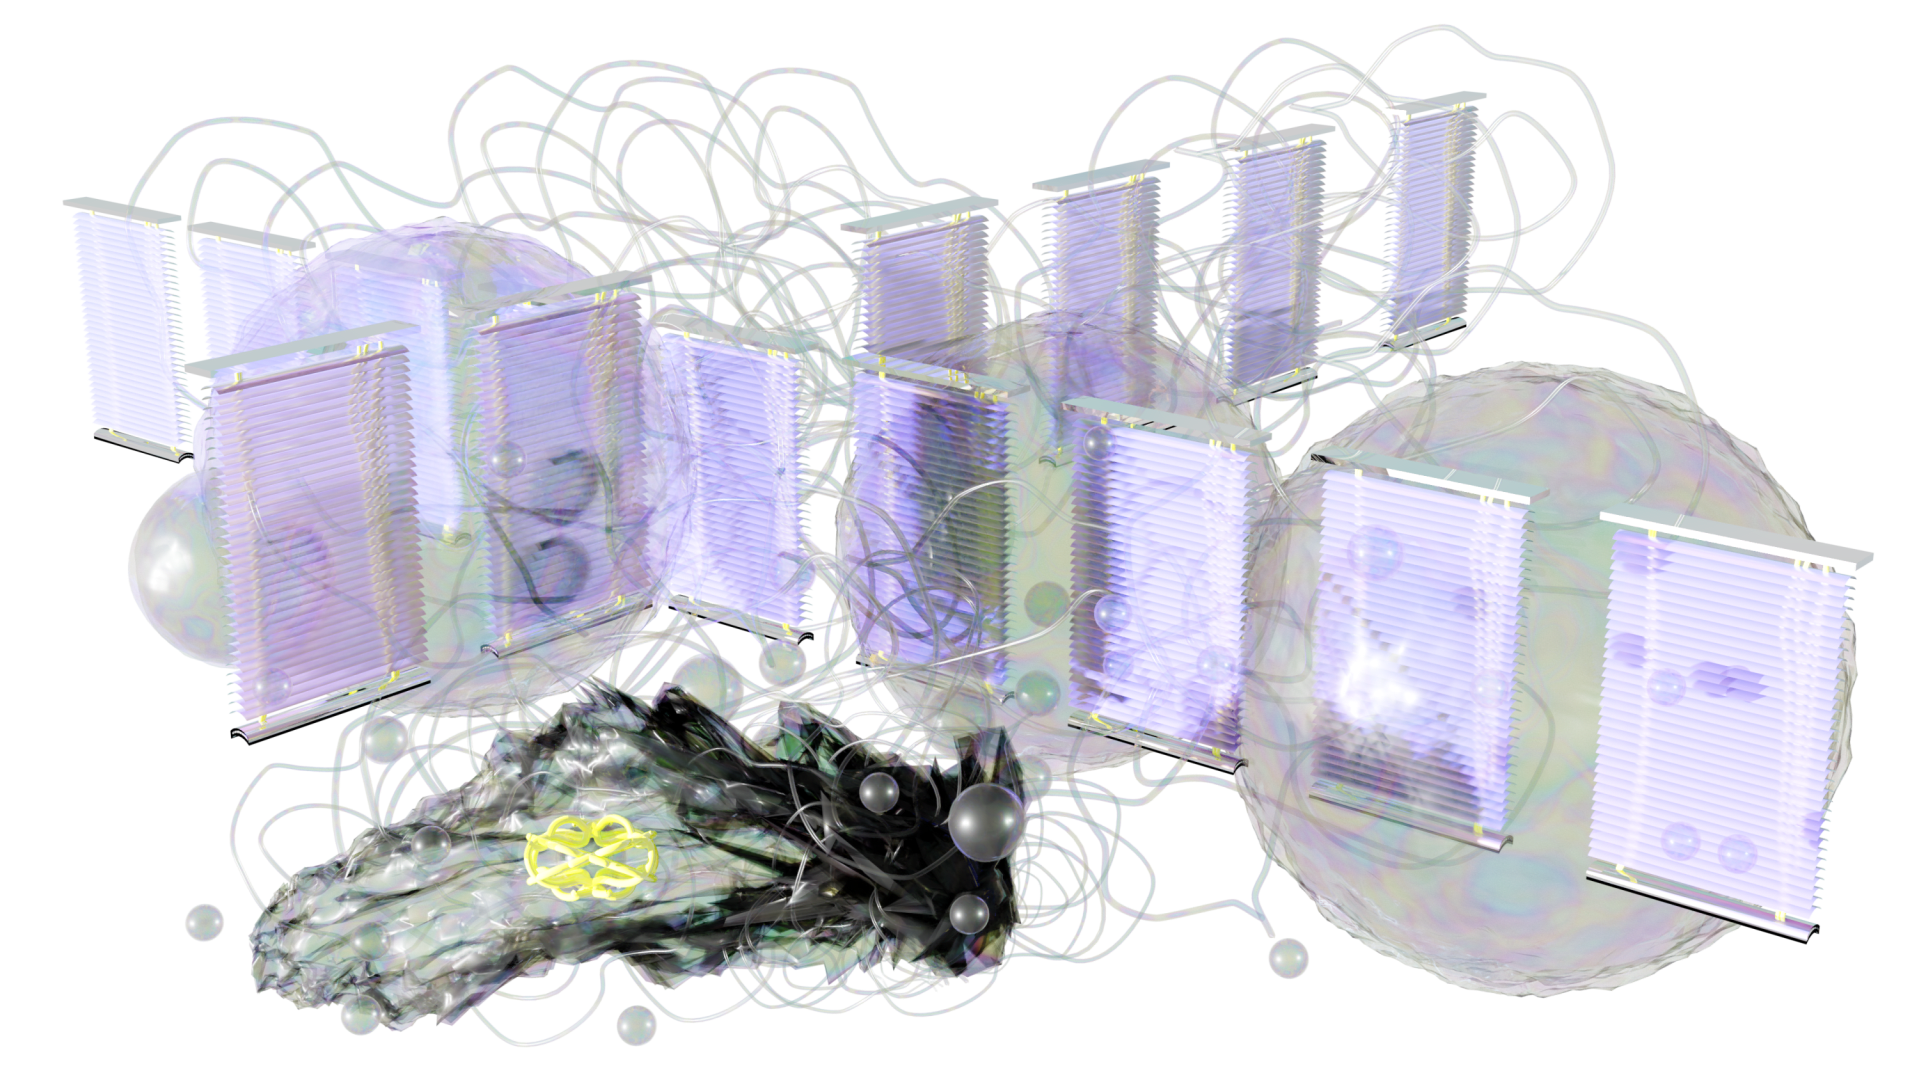 Arranged in a horizontal cross-like shape are 14 iridescent office blinds standing upright. Three large iridescent bubbles sit behind these blinds and long wavy translucent tubes weave in and out of all of these objects. In the bottom left is a darke